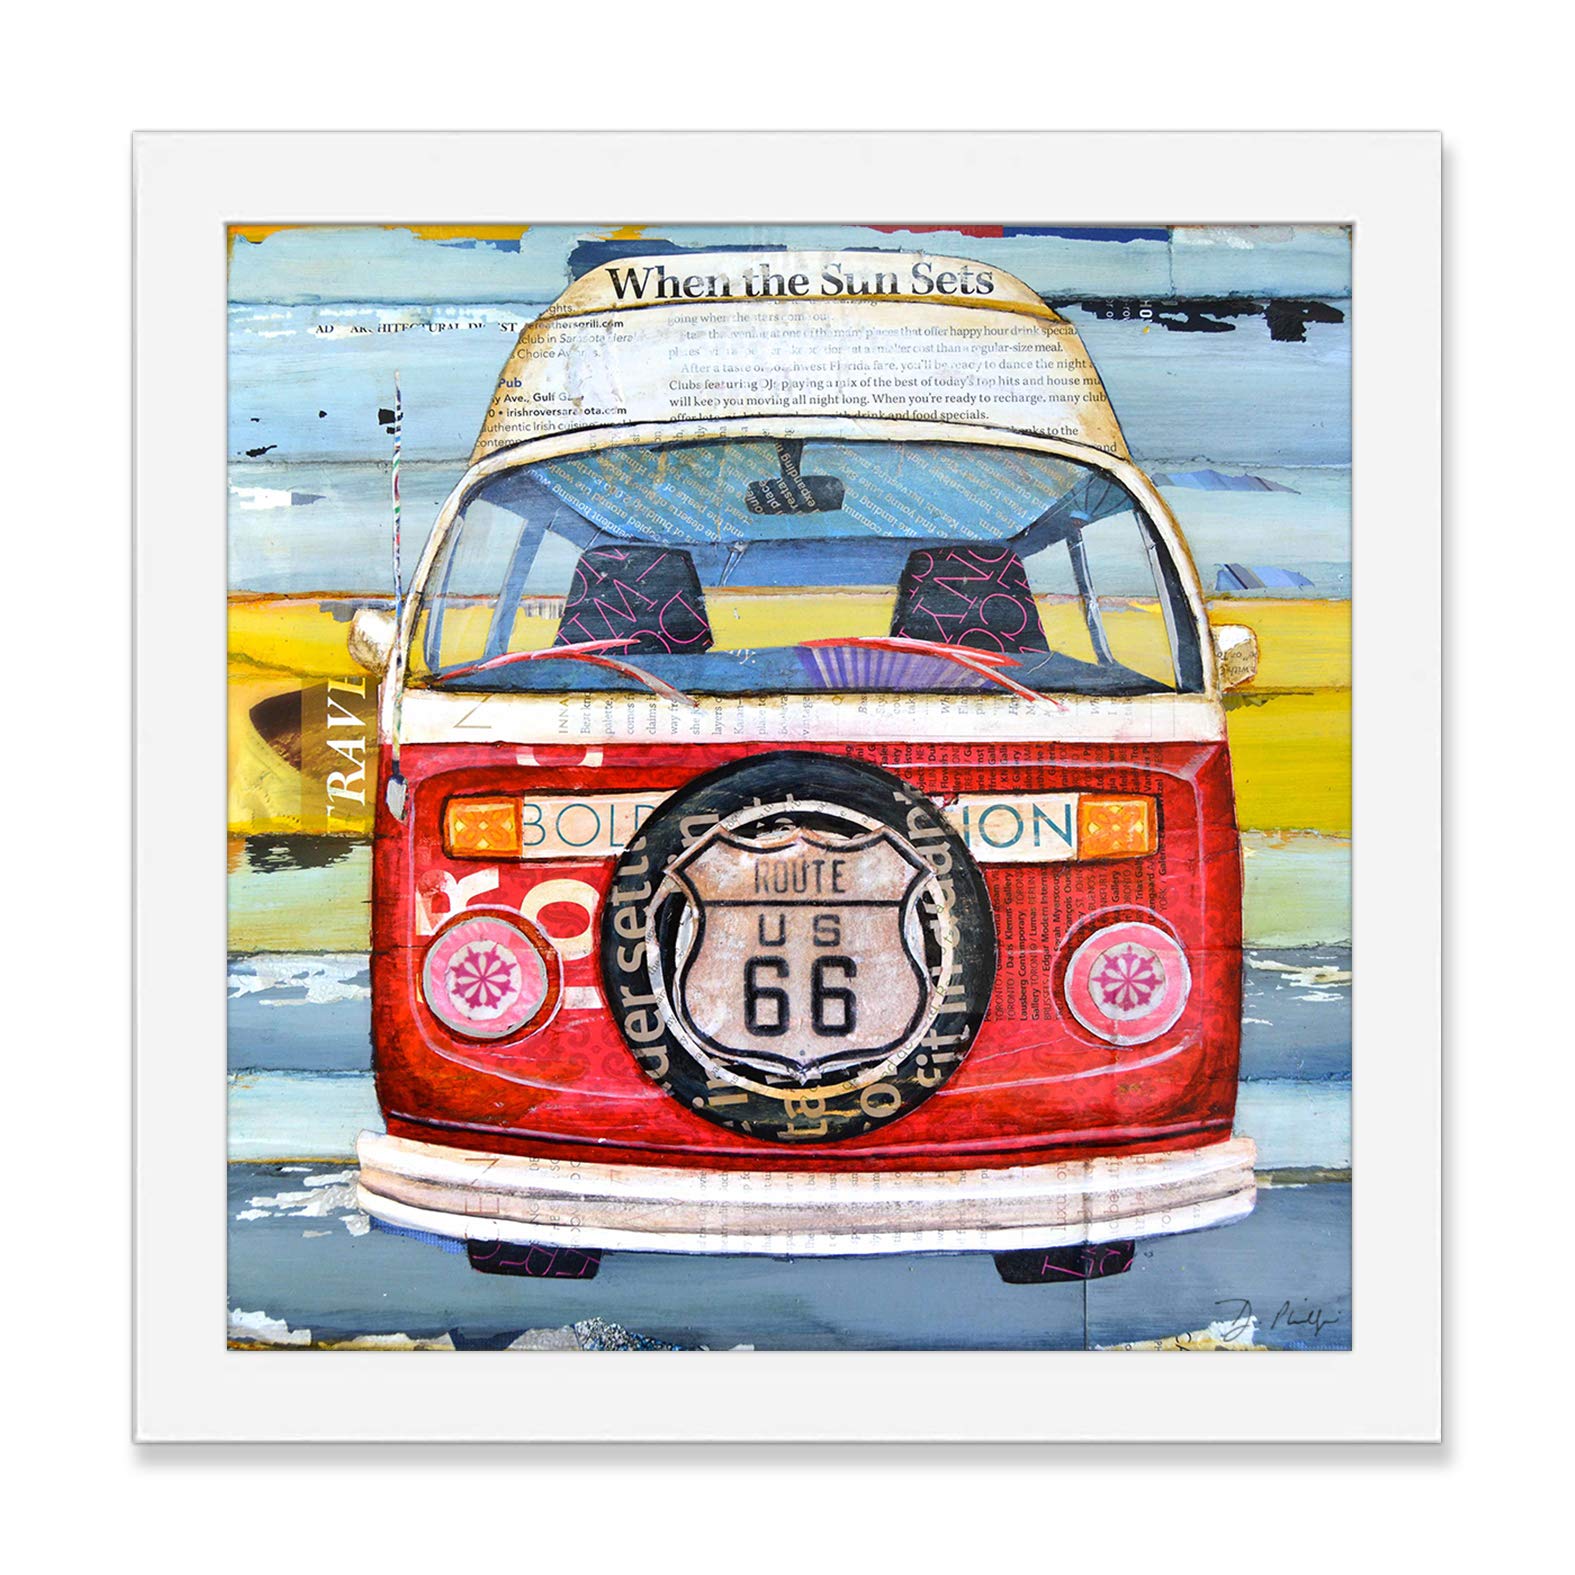 Get Your Kicks, Classic Antique Car Van Camper Danny Phillips Art Print, Unframed, Route 66 Retro Art Wall and Home Decor Poster, Mixed Media Collage Painting, All Sizes